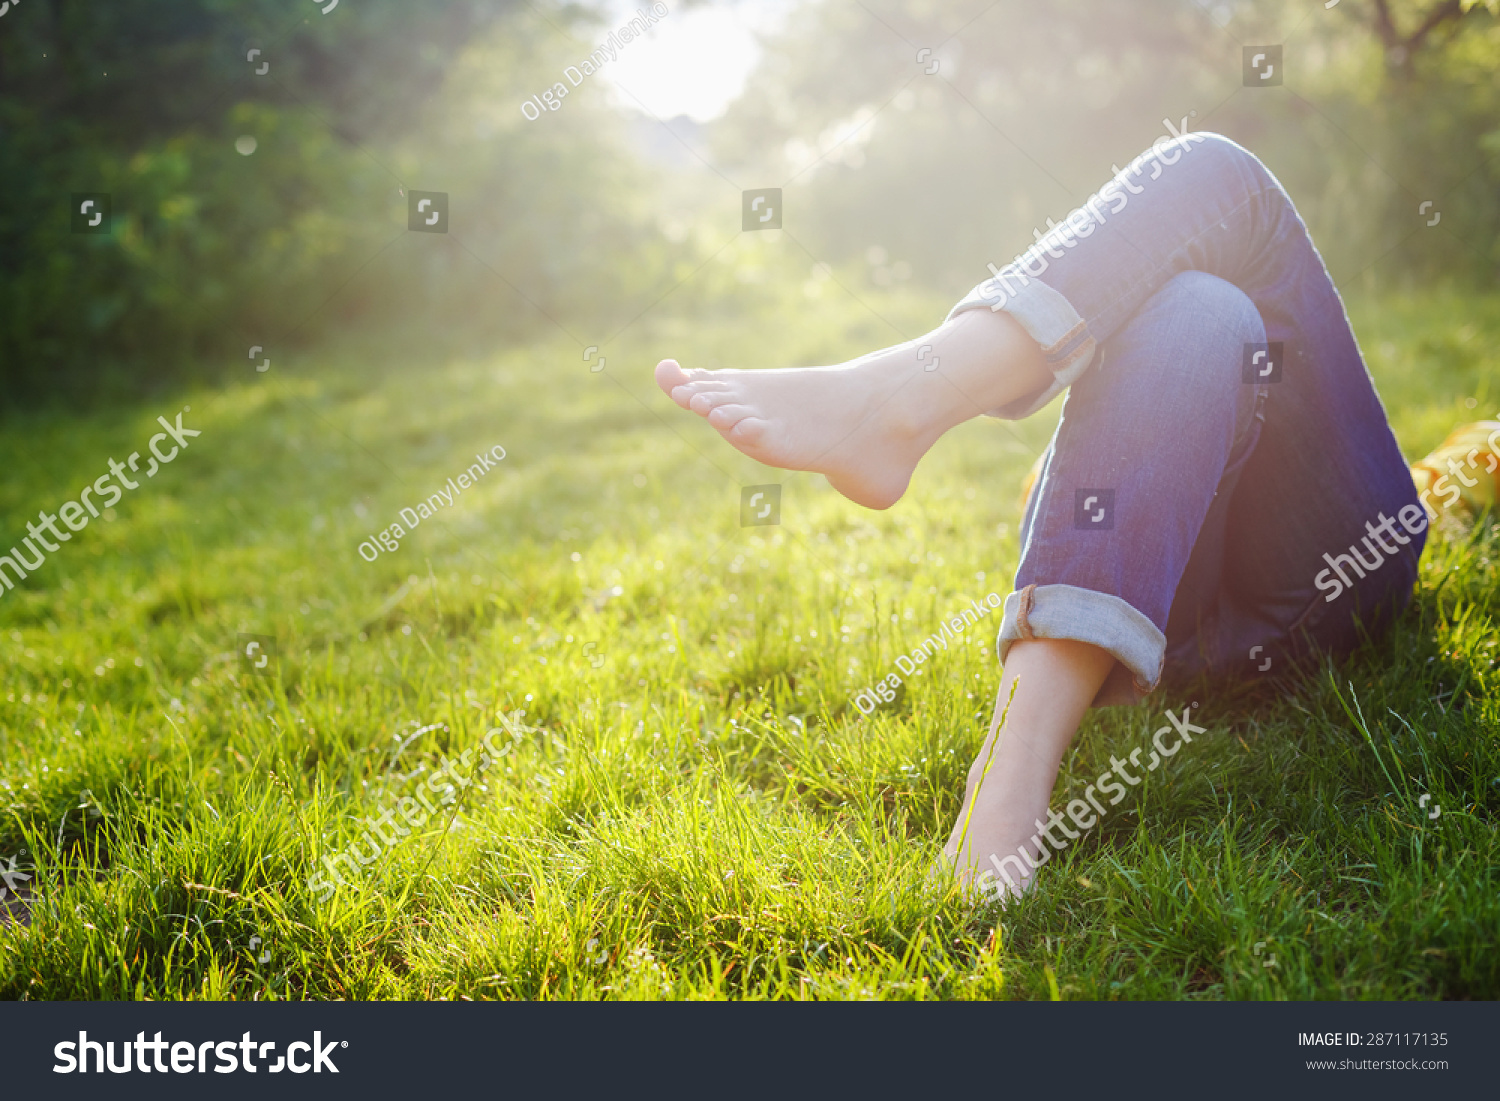 Relaxing in a meadow in the summer sun #287117135